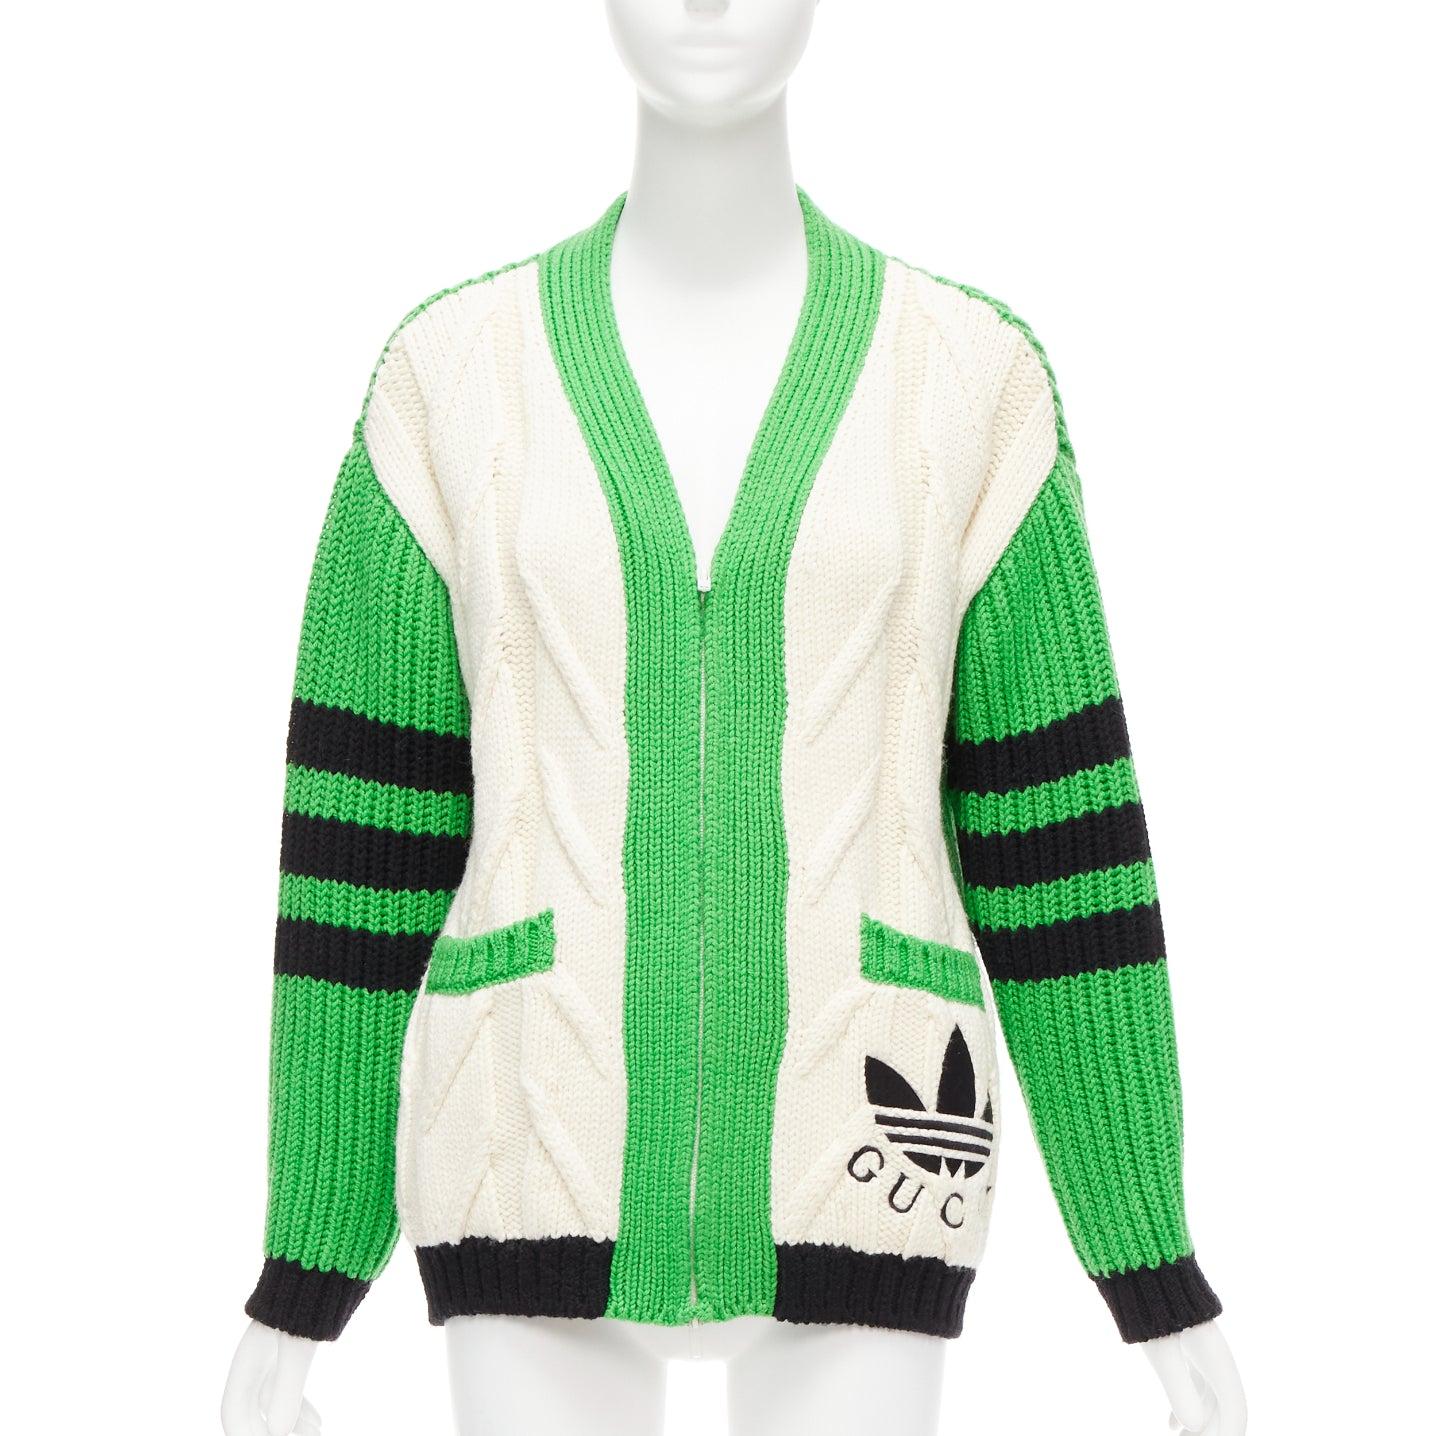 rare GUCCI ADIDAS green cream logo pocket varsity cable knit cardigan coat XXS
Reference: AAWC/A00625
Brand: Gucci
Collection: ADIDAS
Material: Wool
Color: Green, Cream
Pattern: Colorblock
Closure: Zip
Extra Details: Dual patch front pockets. Logo